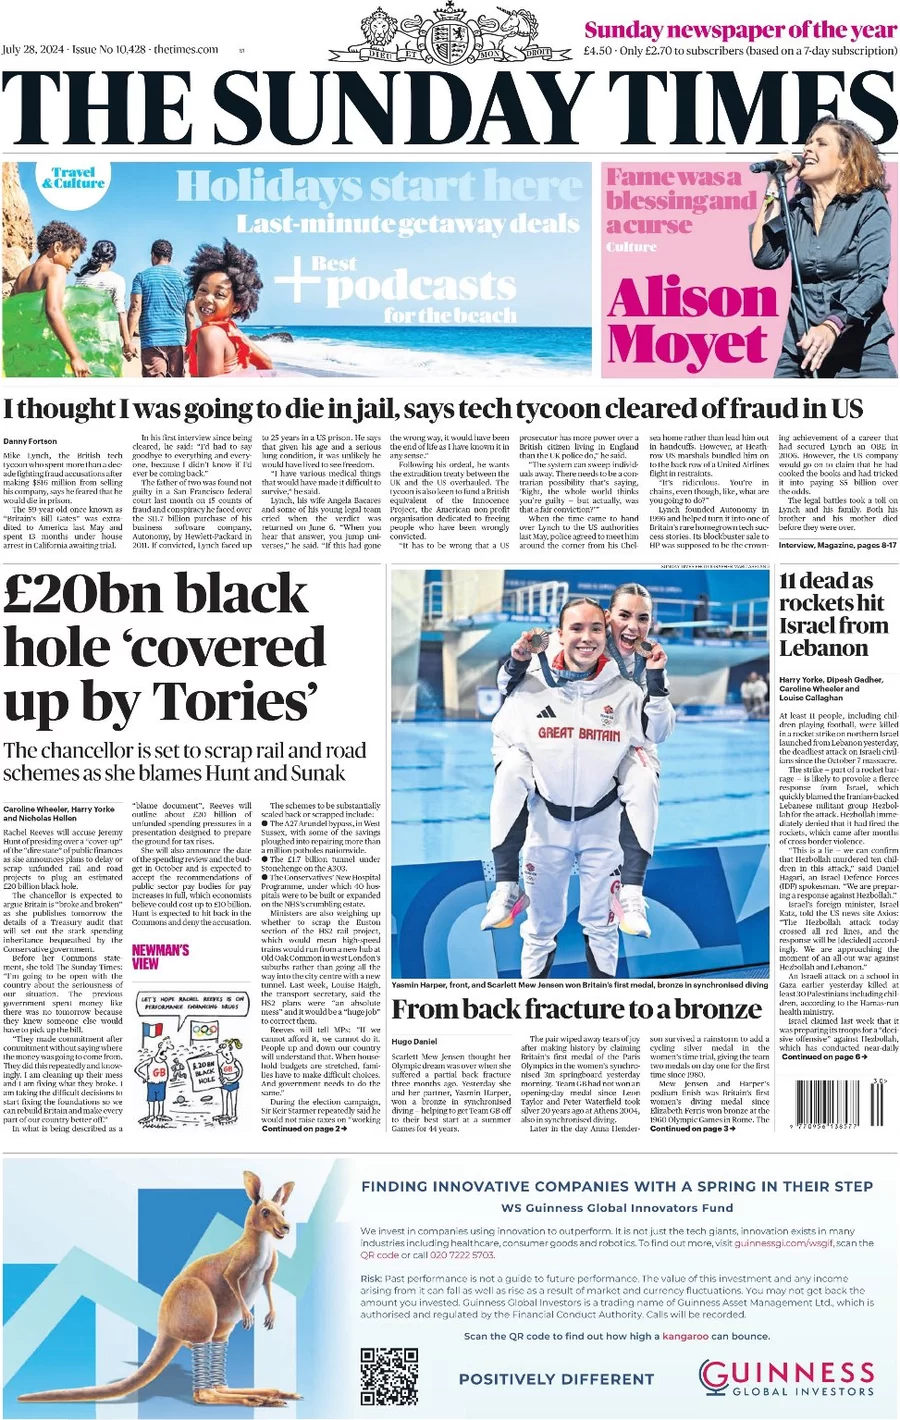 The Sunday Times - £20bn black hole coverup by Tories 